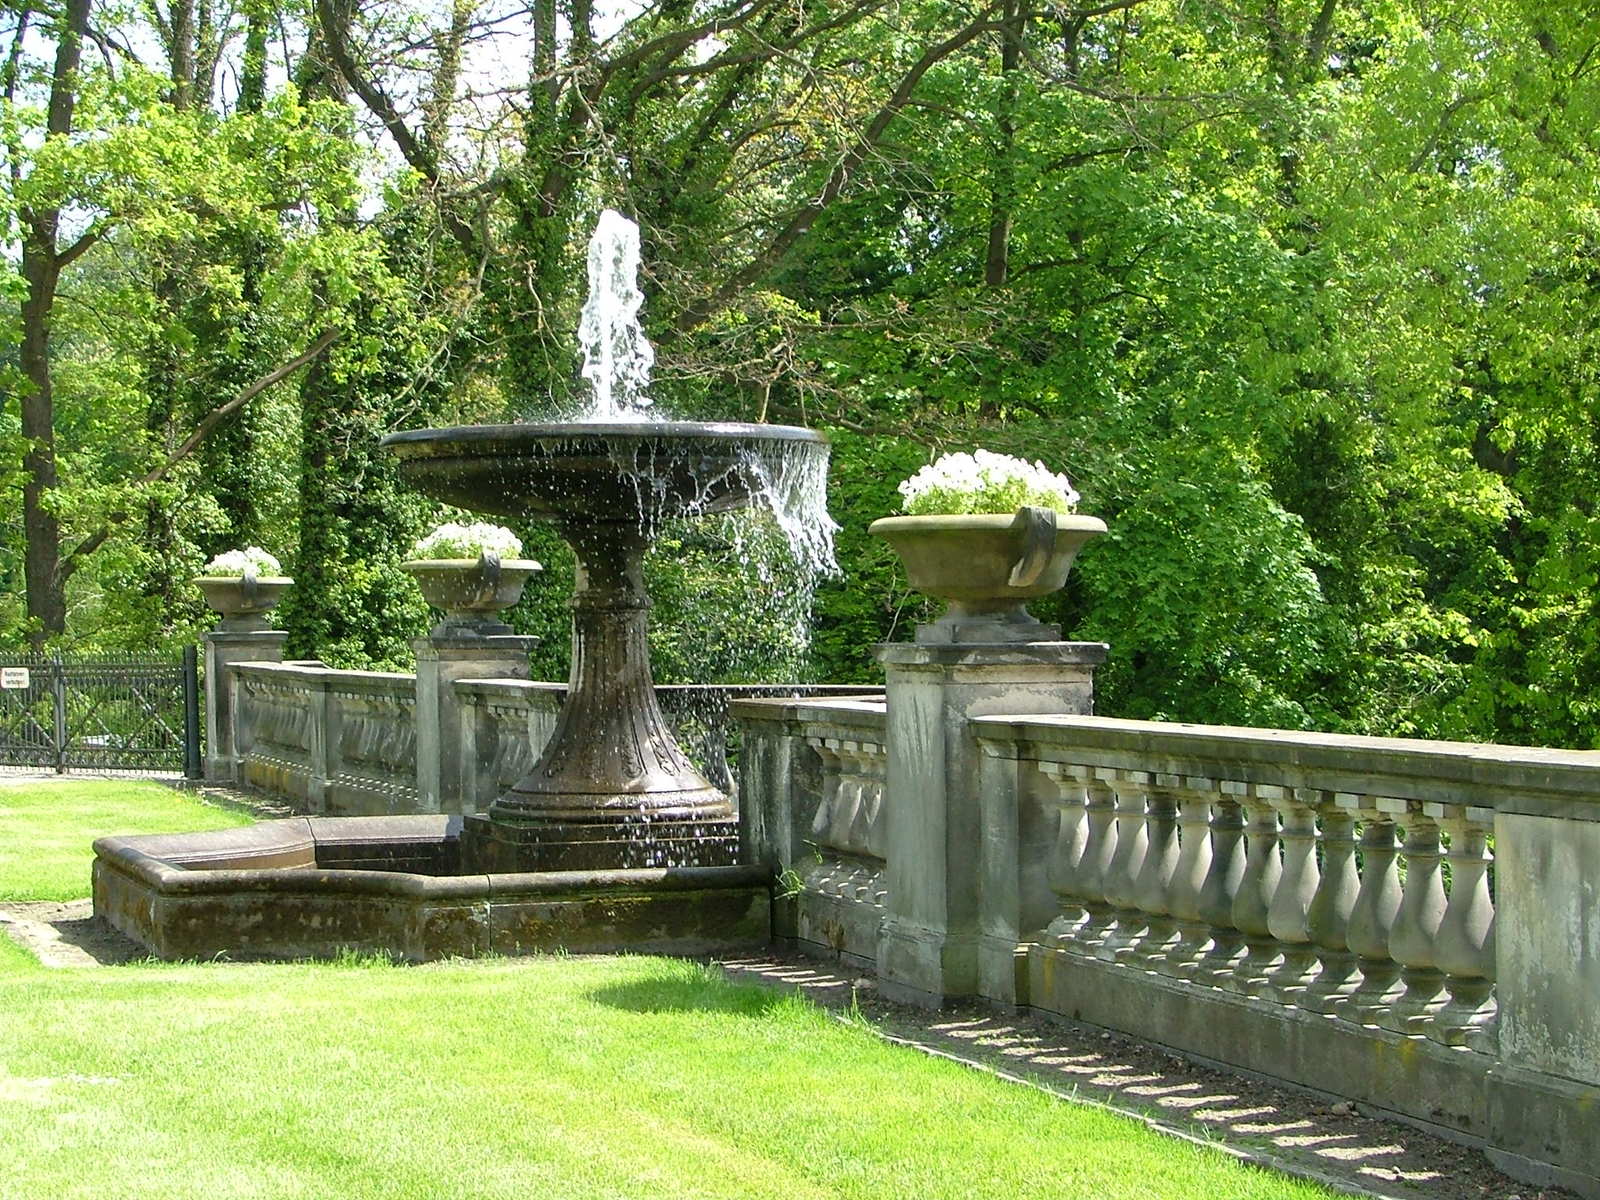 the fountain is in the center of a long garden